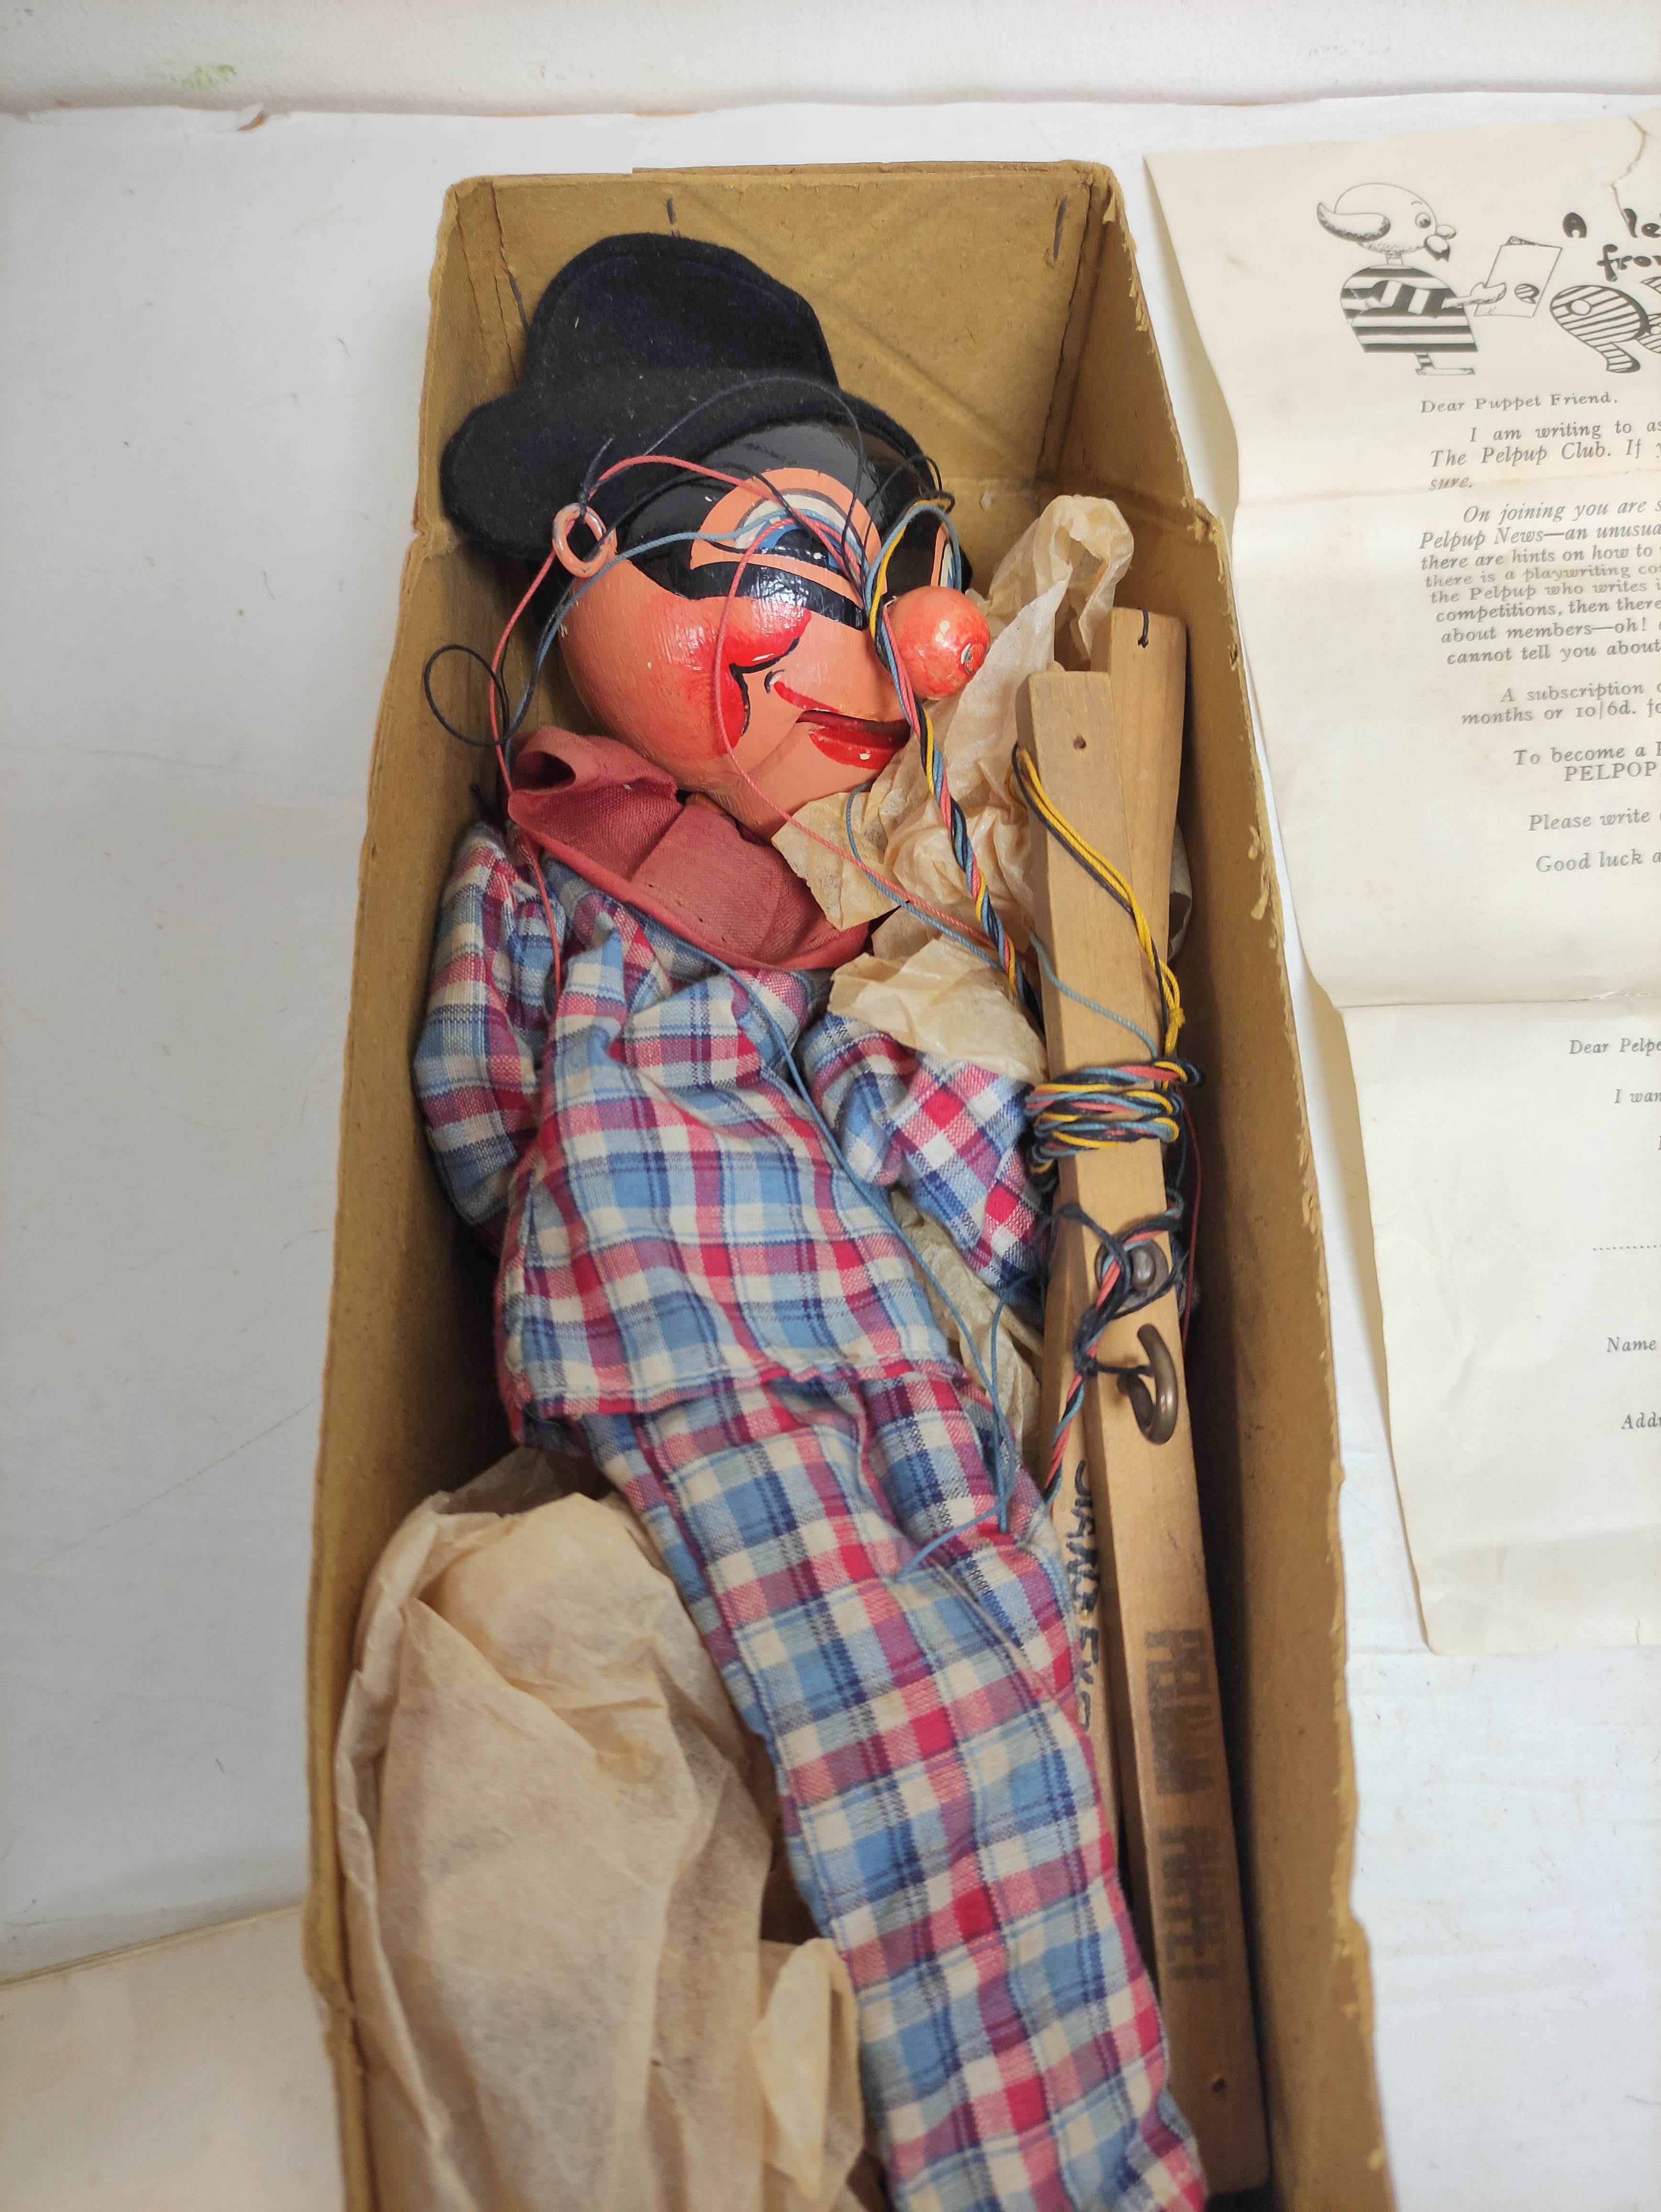 Scarce Pelham Puppet Harlequin type SM marionette with box, instructions and fan club letter. - Image 3 of 15